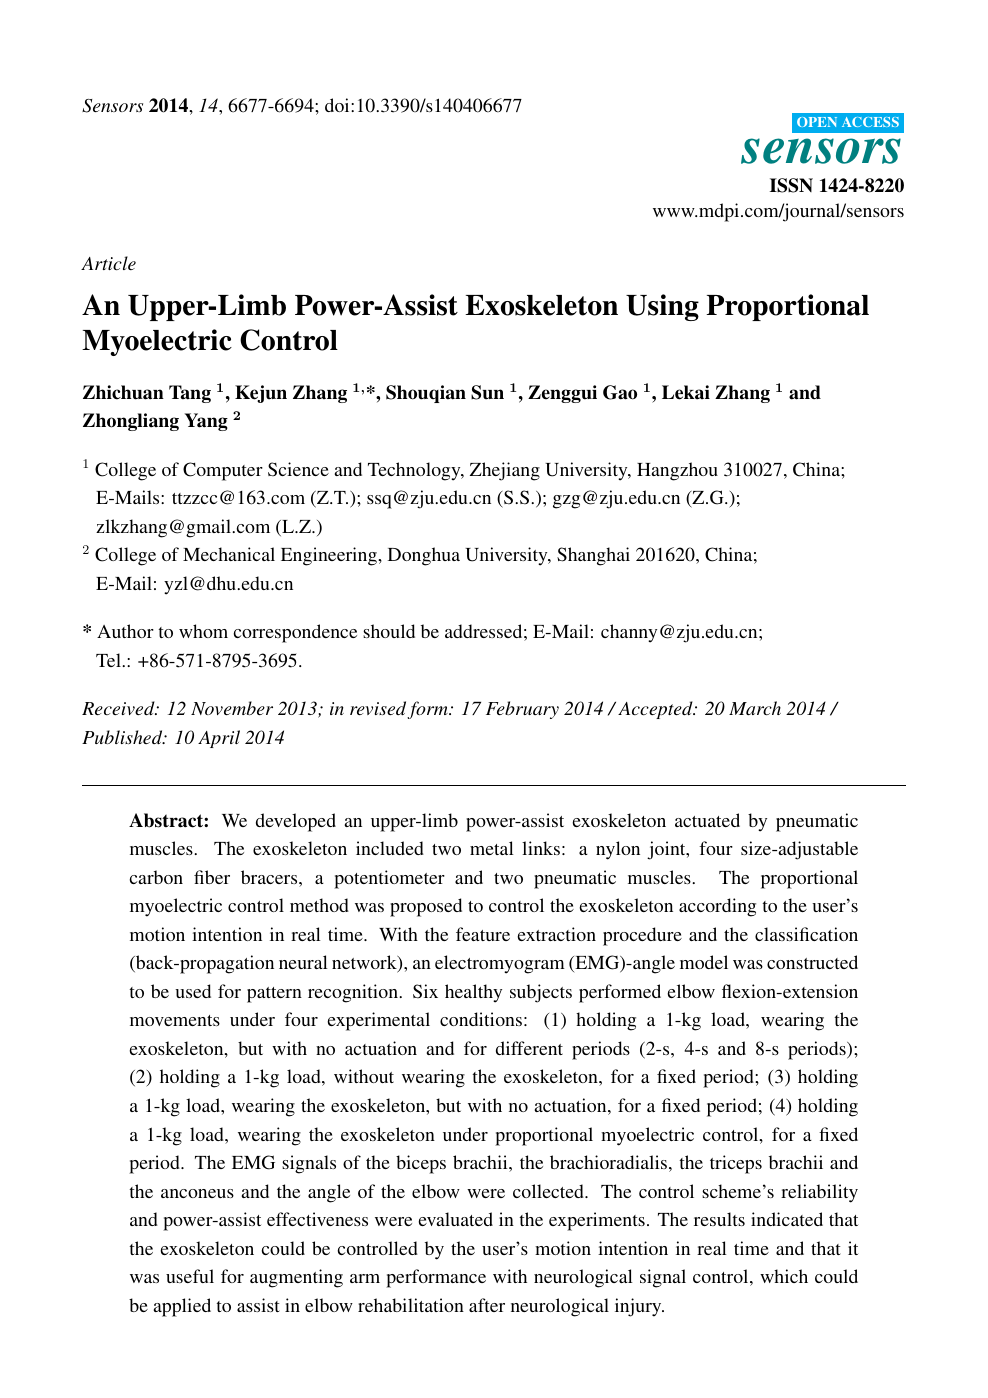 An Upper Limb Power Assist Exoskeleton Using Proportional Myoelectric Control Topic Of Research Paper In Medical Engineering Download Scholarly Article Pdf And Read For Free On Cyberleninka Open Science Hub